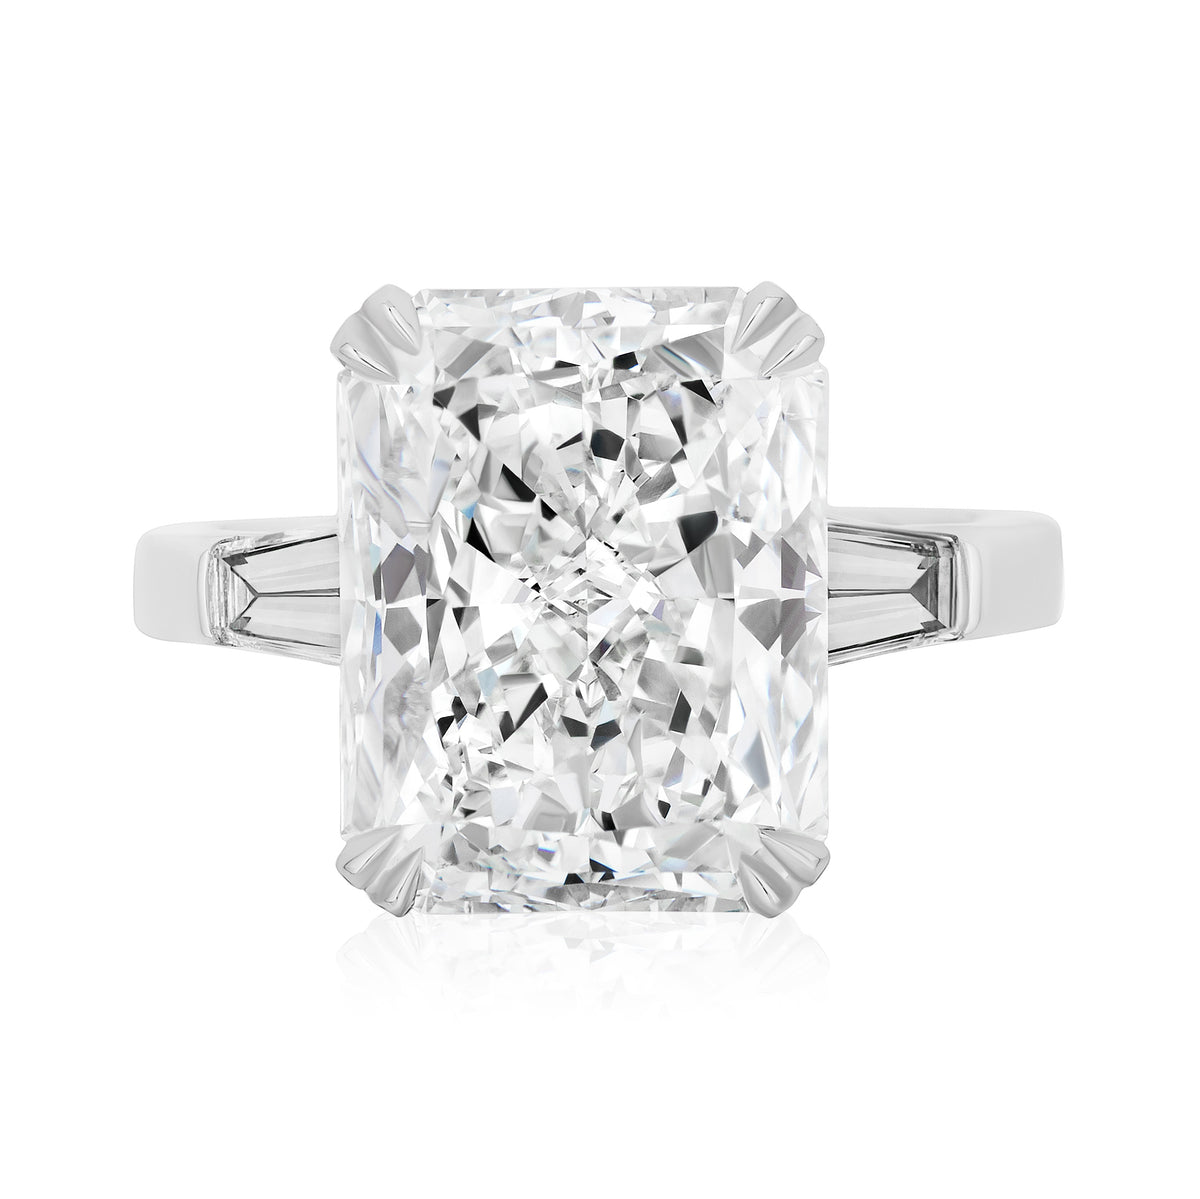 Radiant Cut Diamond Engagement Ring with Tapered Baguettes